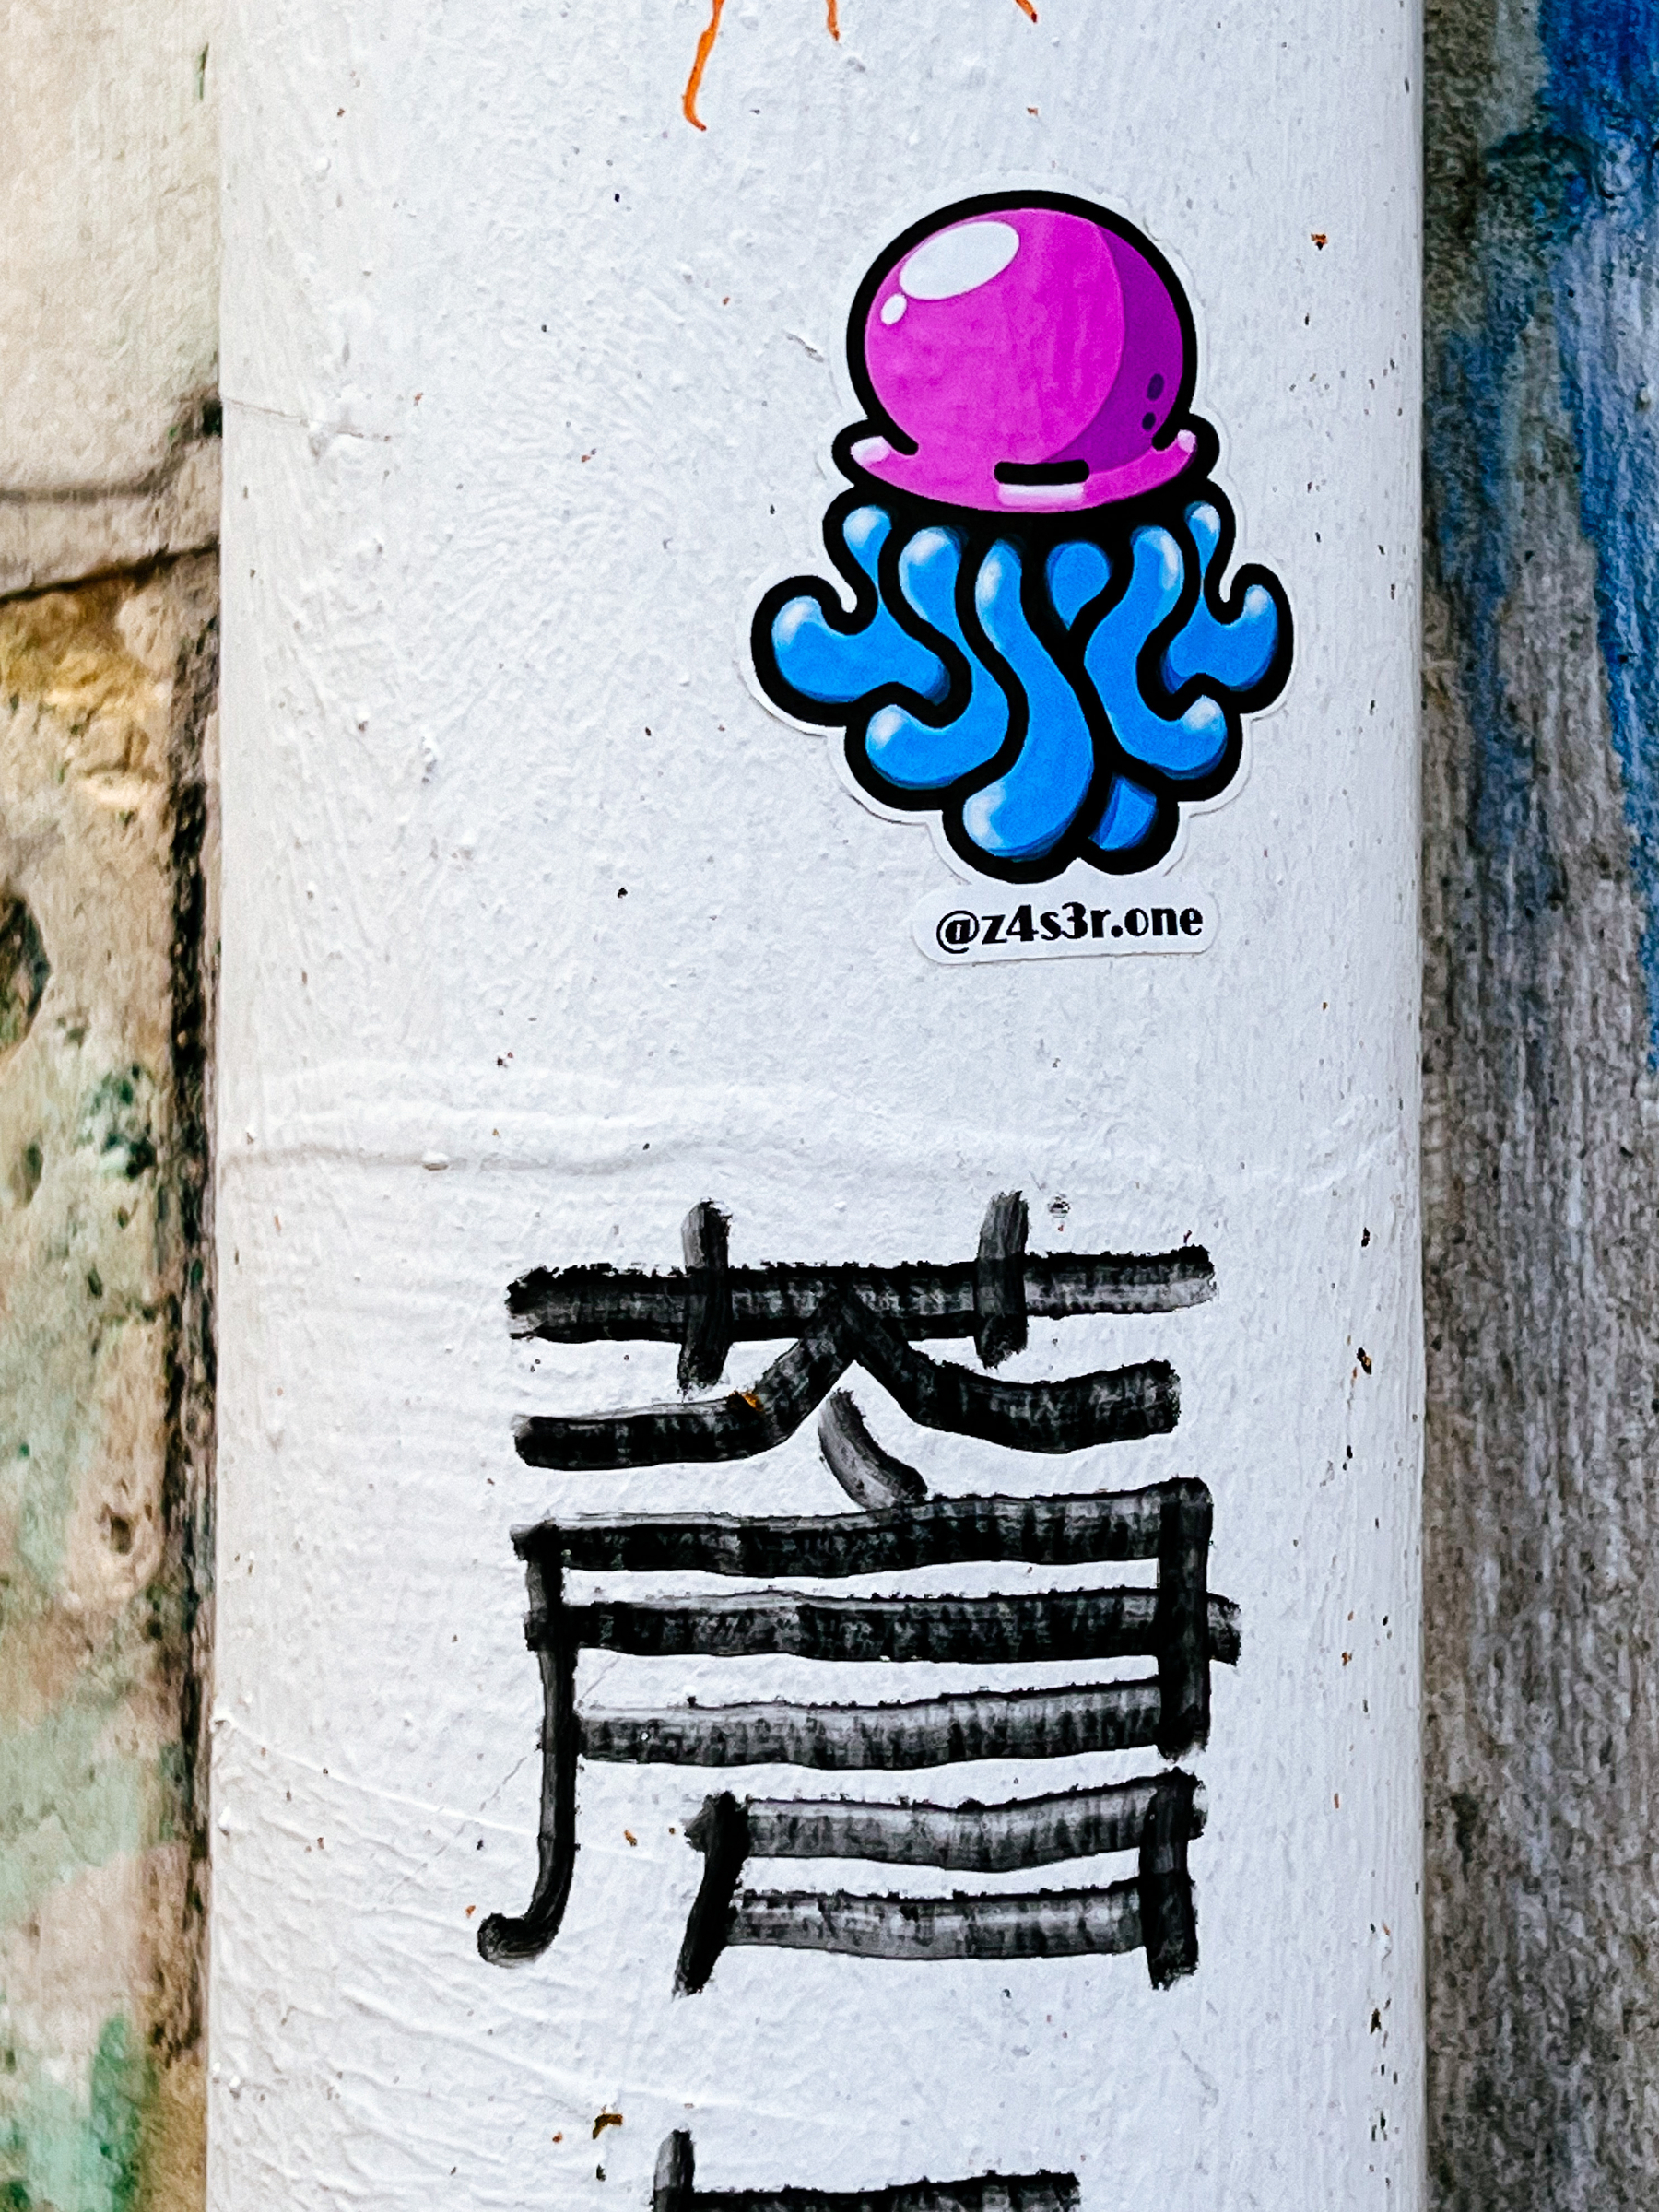 Sticker of a pink squid/octopus-like creature, with blue legs. 